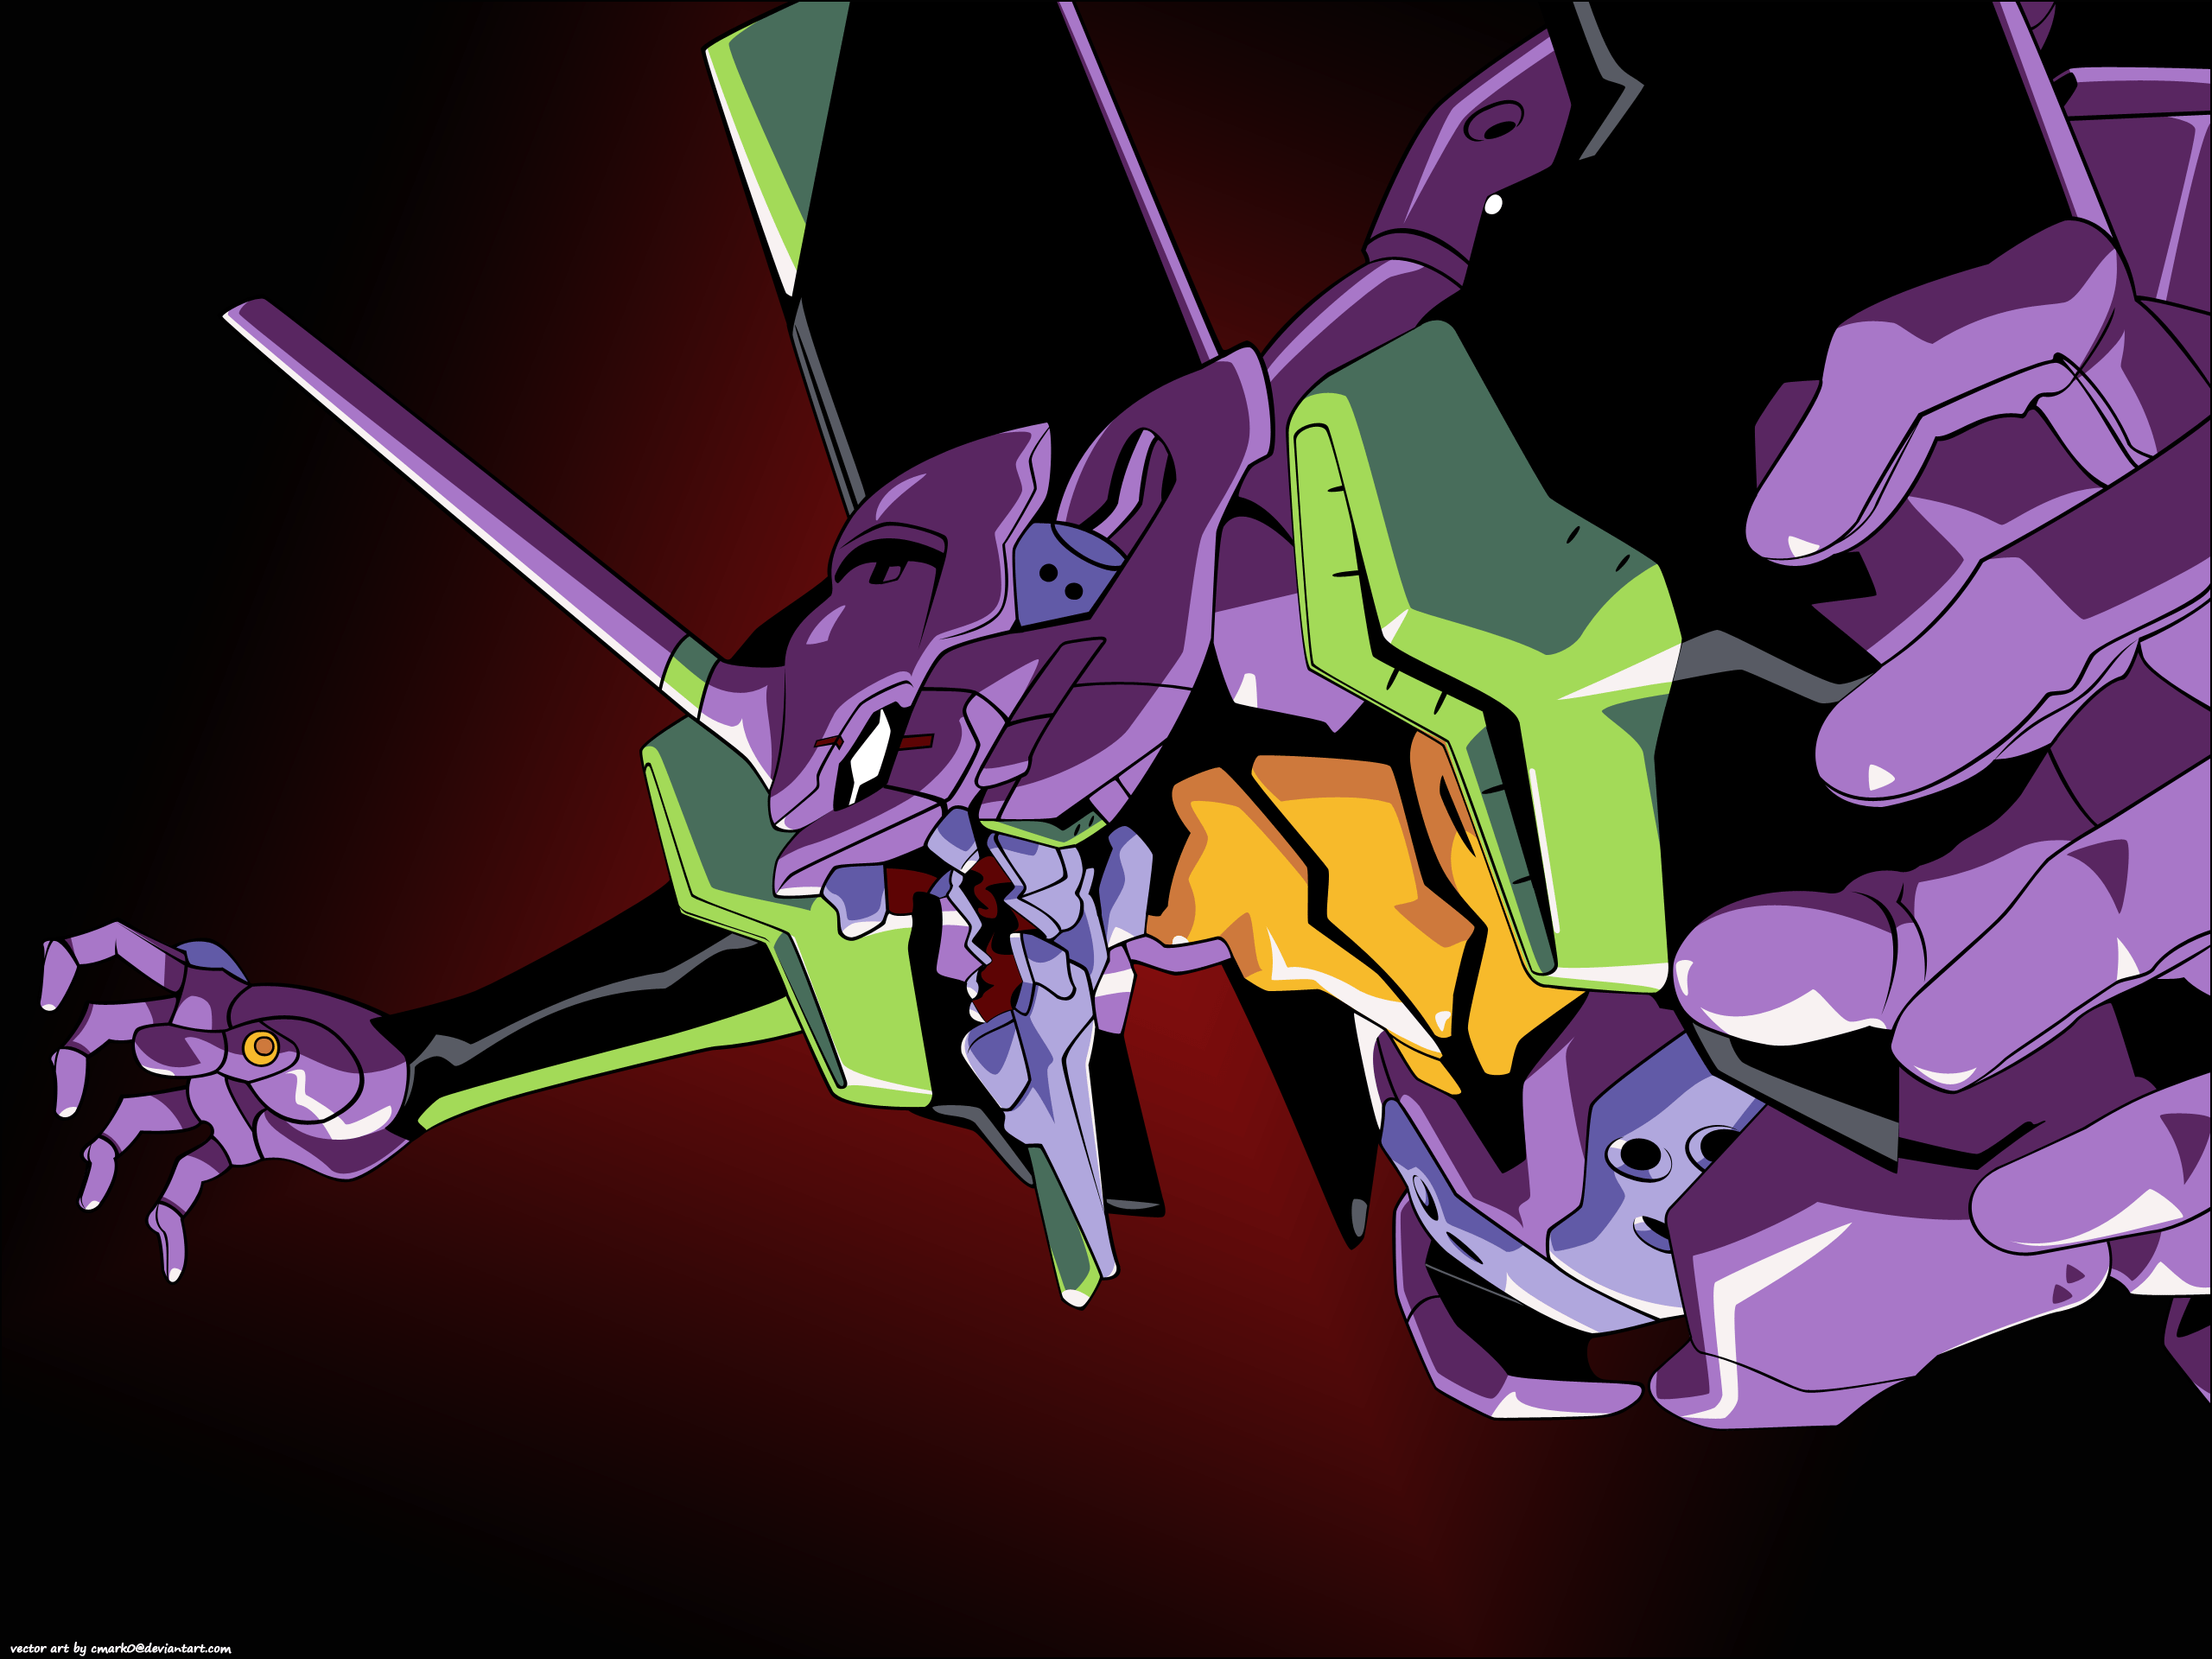 Evangelion Unit 01 Wallpaper by Iconfactory on Dribbble